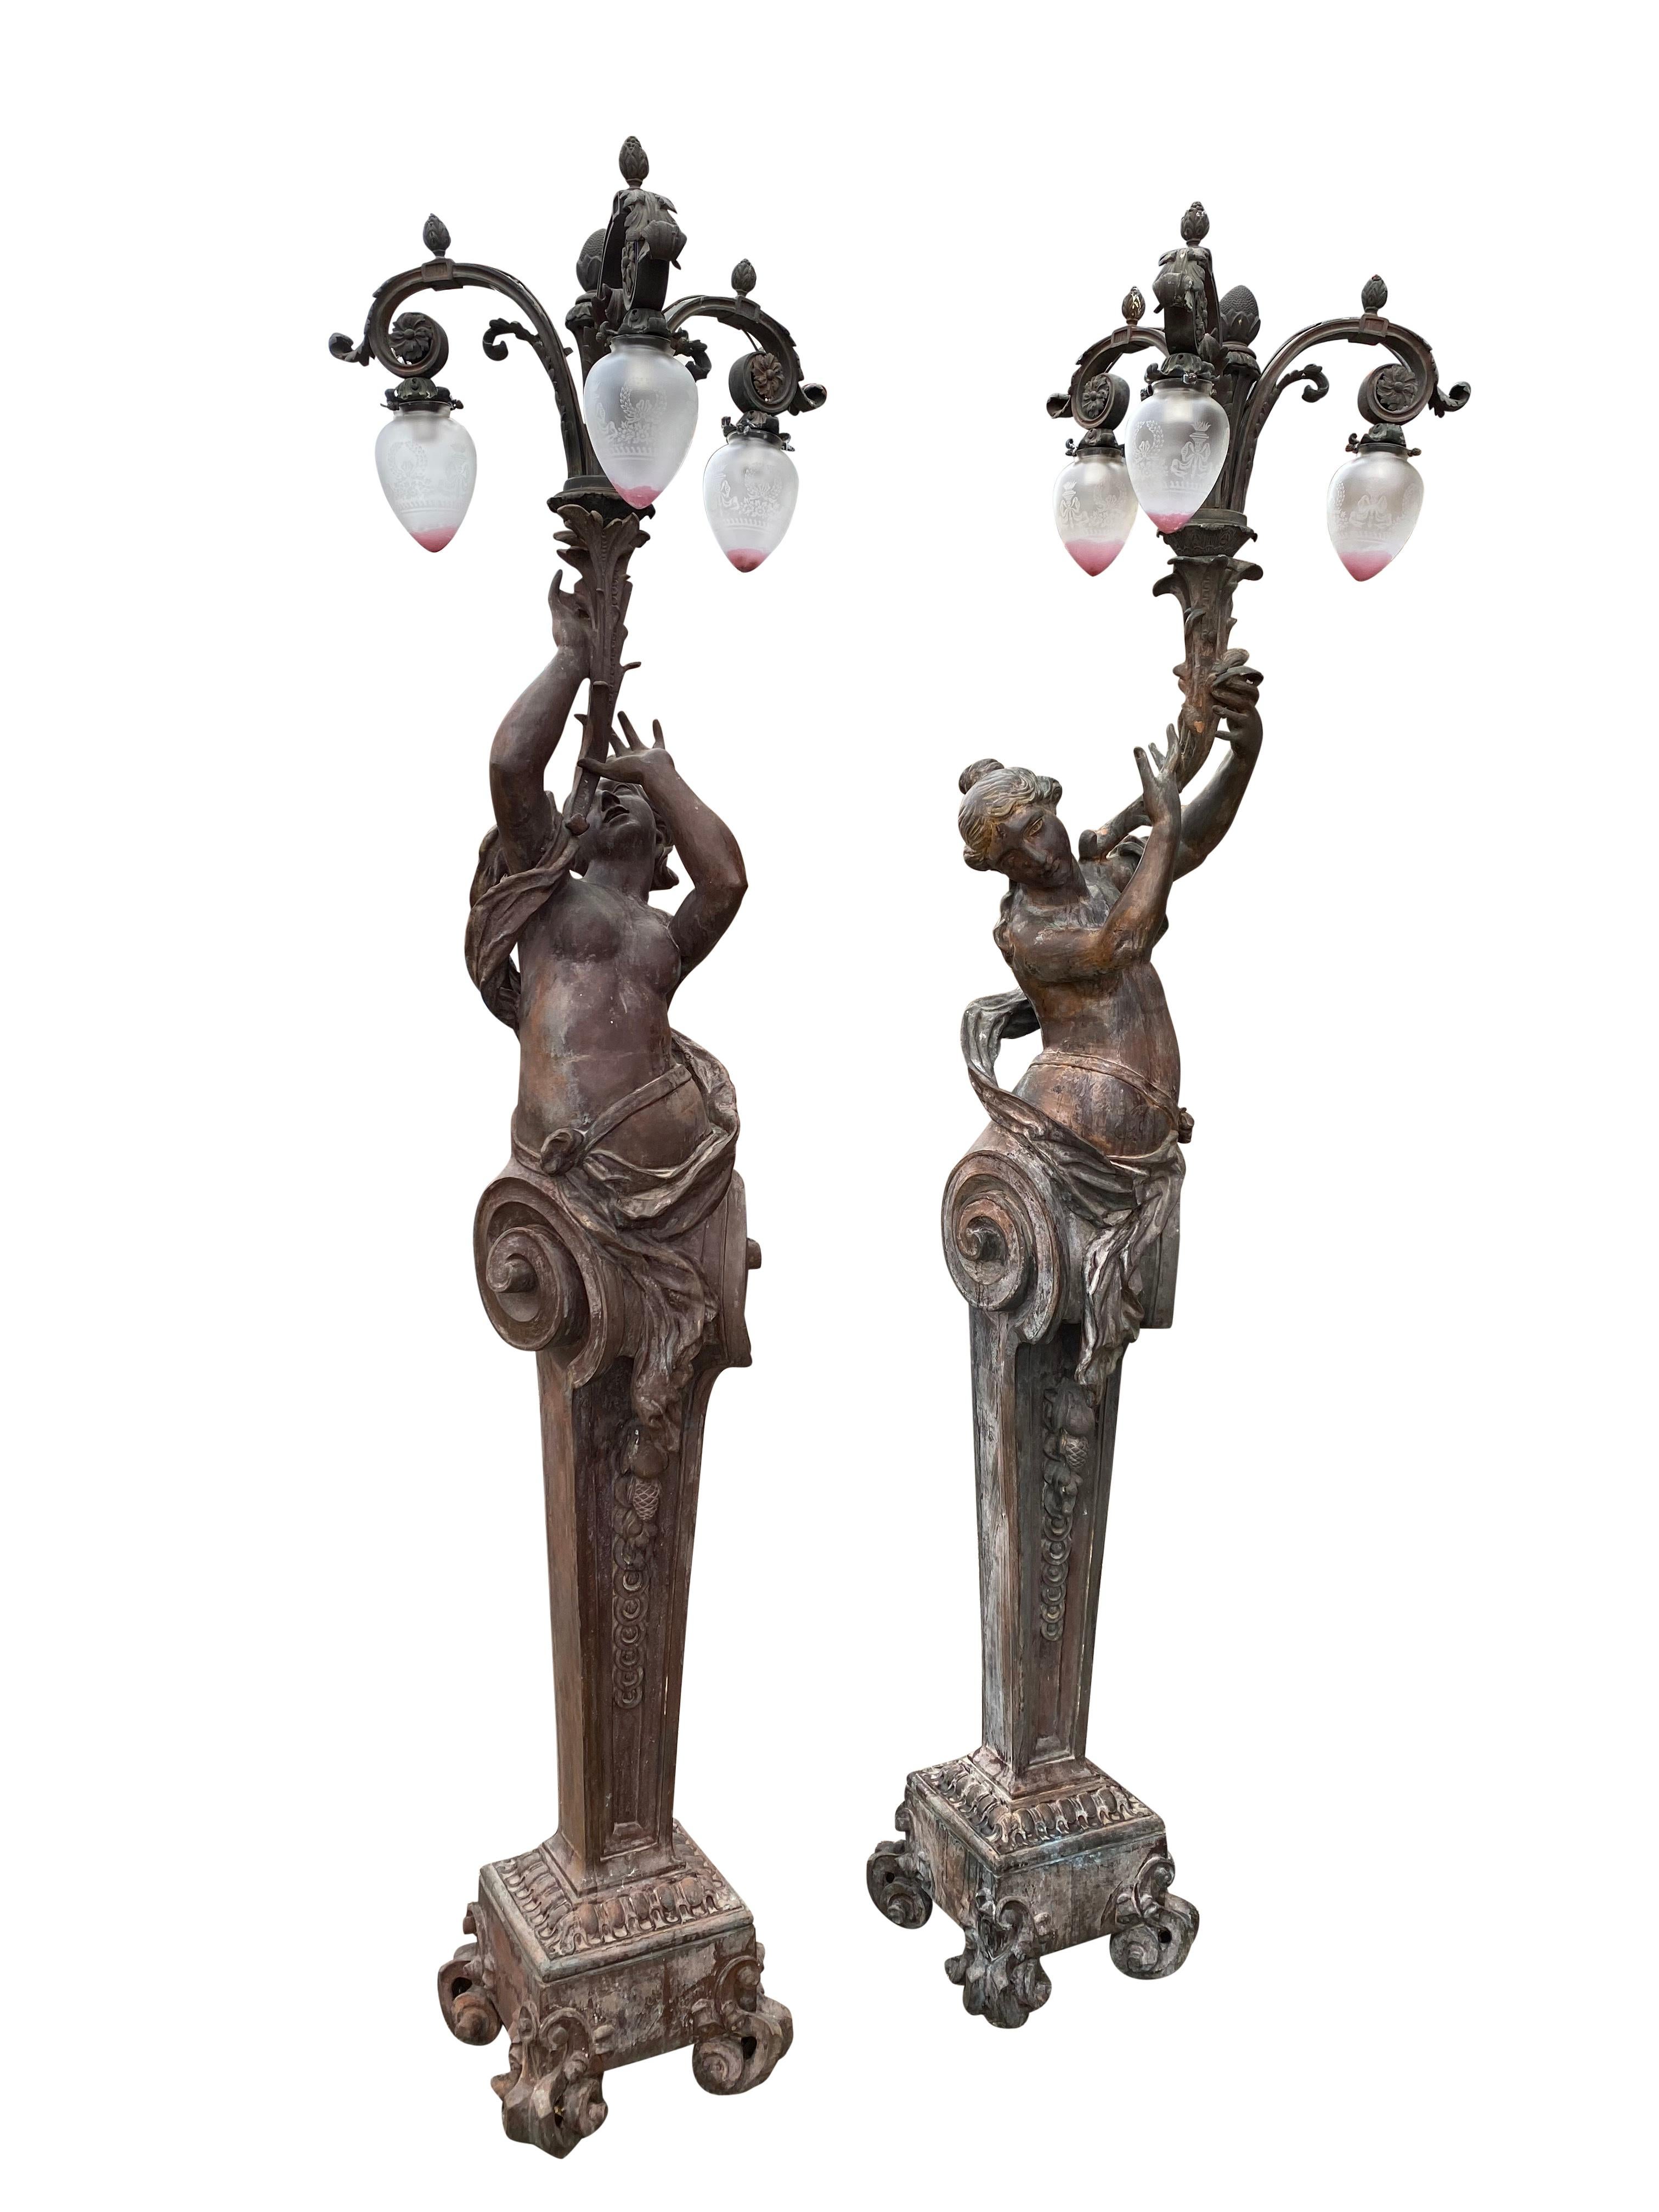 A very large pair of bronze torchère figurative lamps, circa 1920s. Originally from a Viennese theatre house, and removed during the Second World War, where they were stored ever since. We had the lucky opportunity to purchase these recently. They